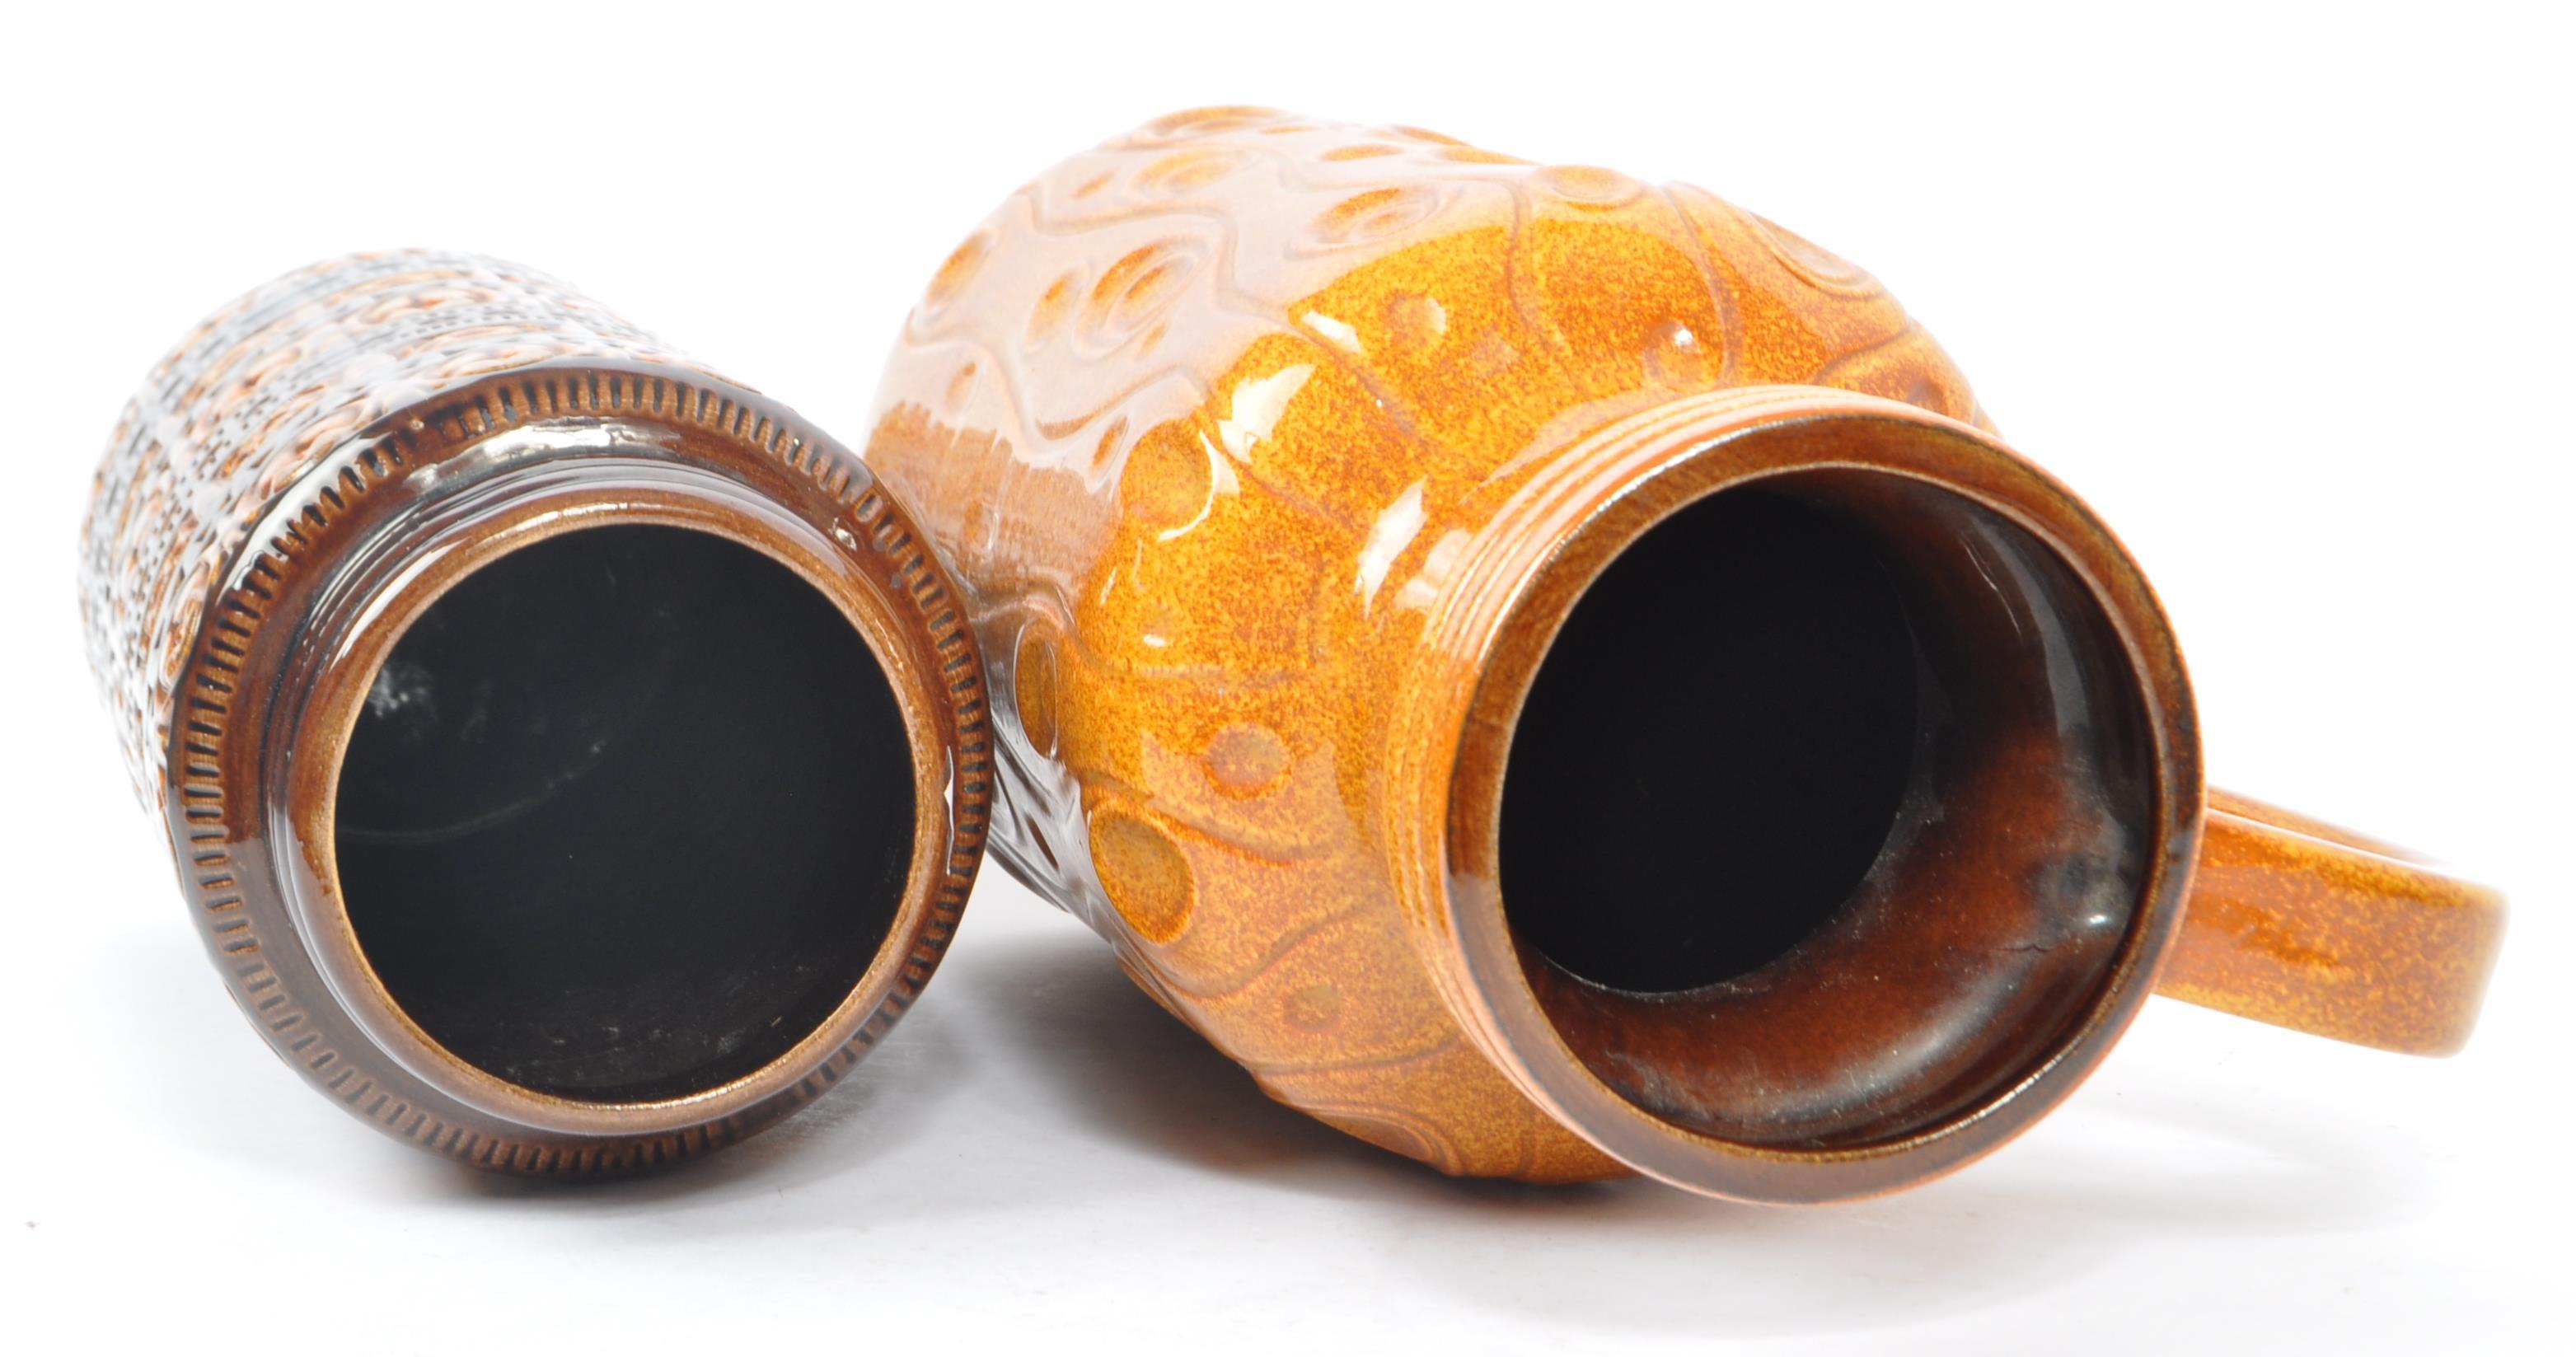 SCHEURICH - WEST GERMAN POTTERY - TWO MID CENTURY VASES - Image 5 of 6